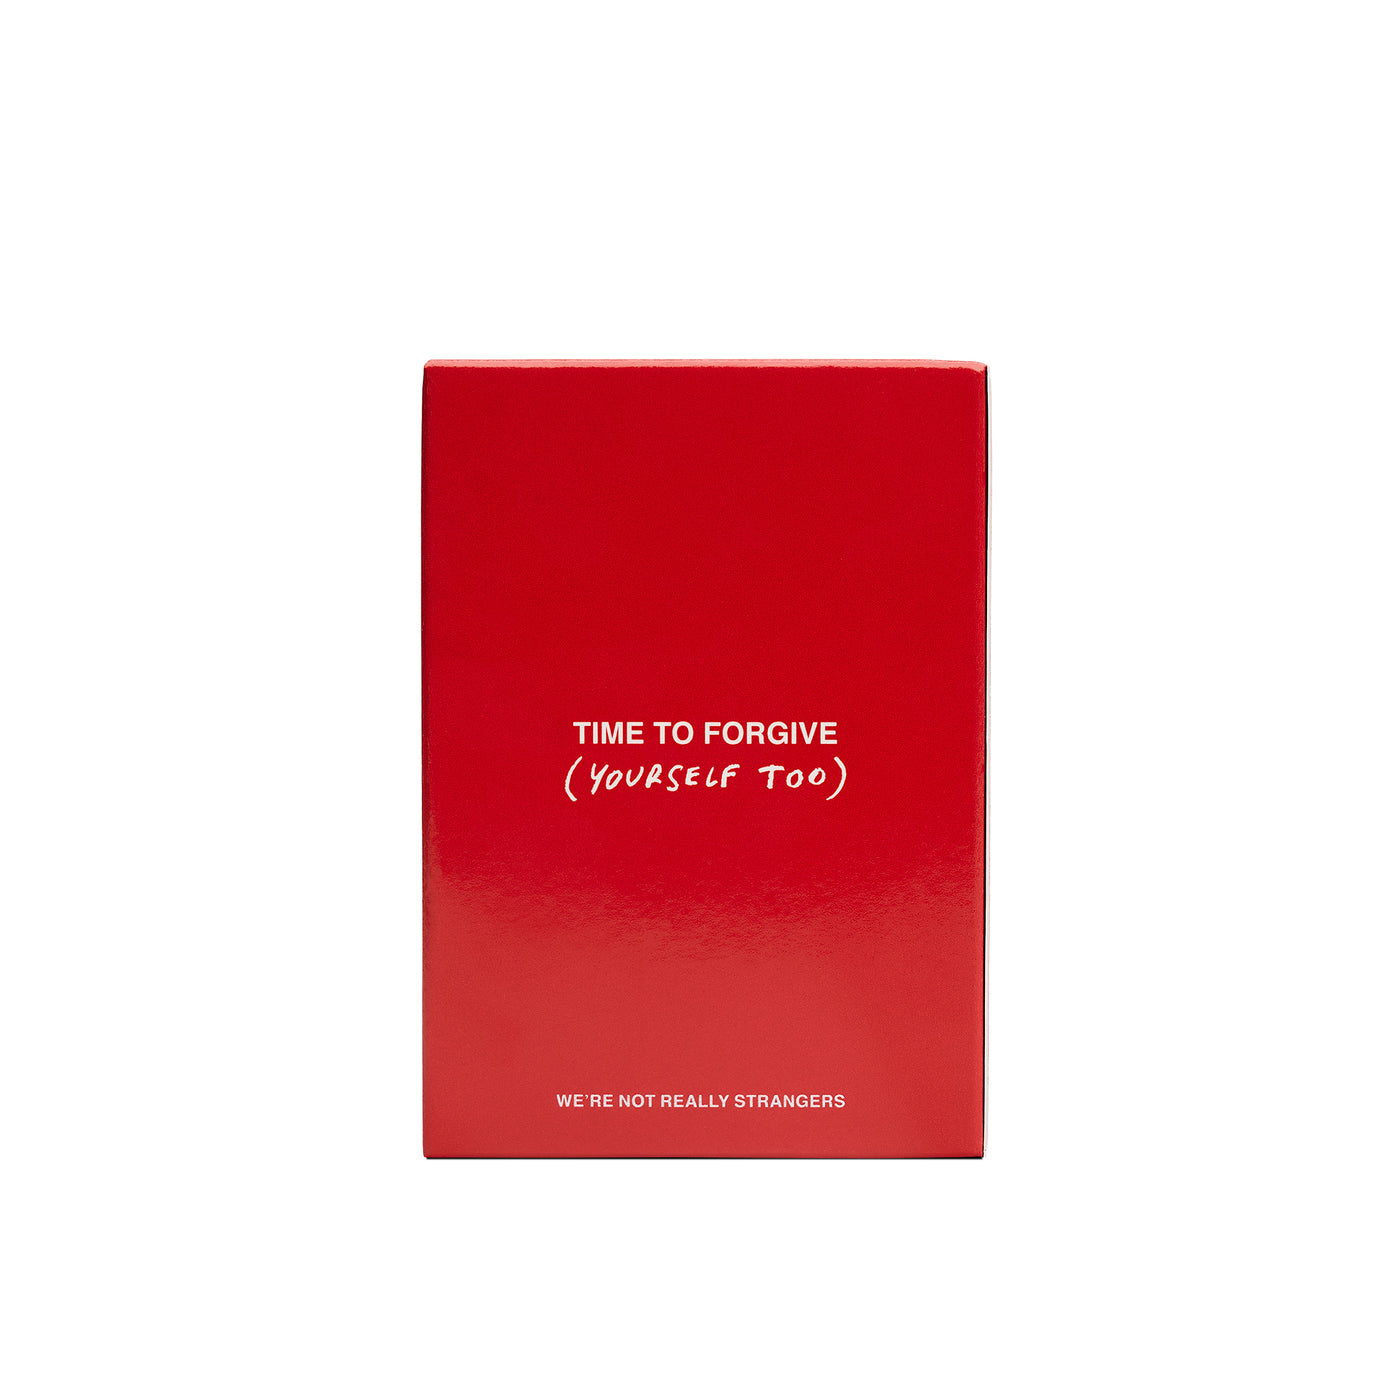 We're Not Really Strangers Forgiveness Edition pack back reading "Time to Forgive (yourself too).